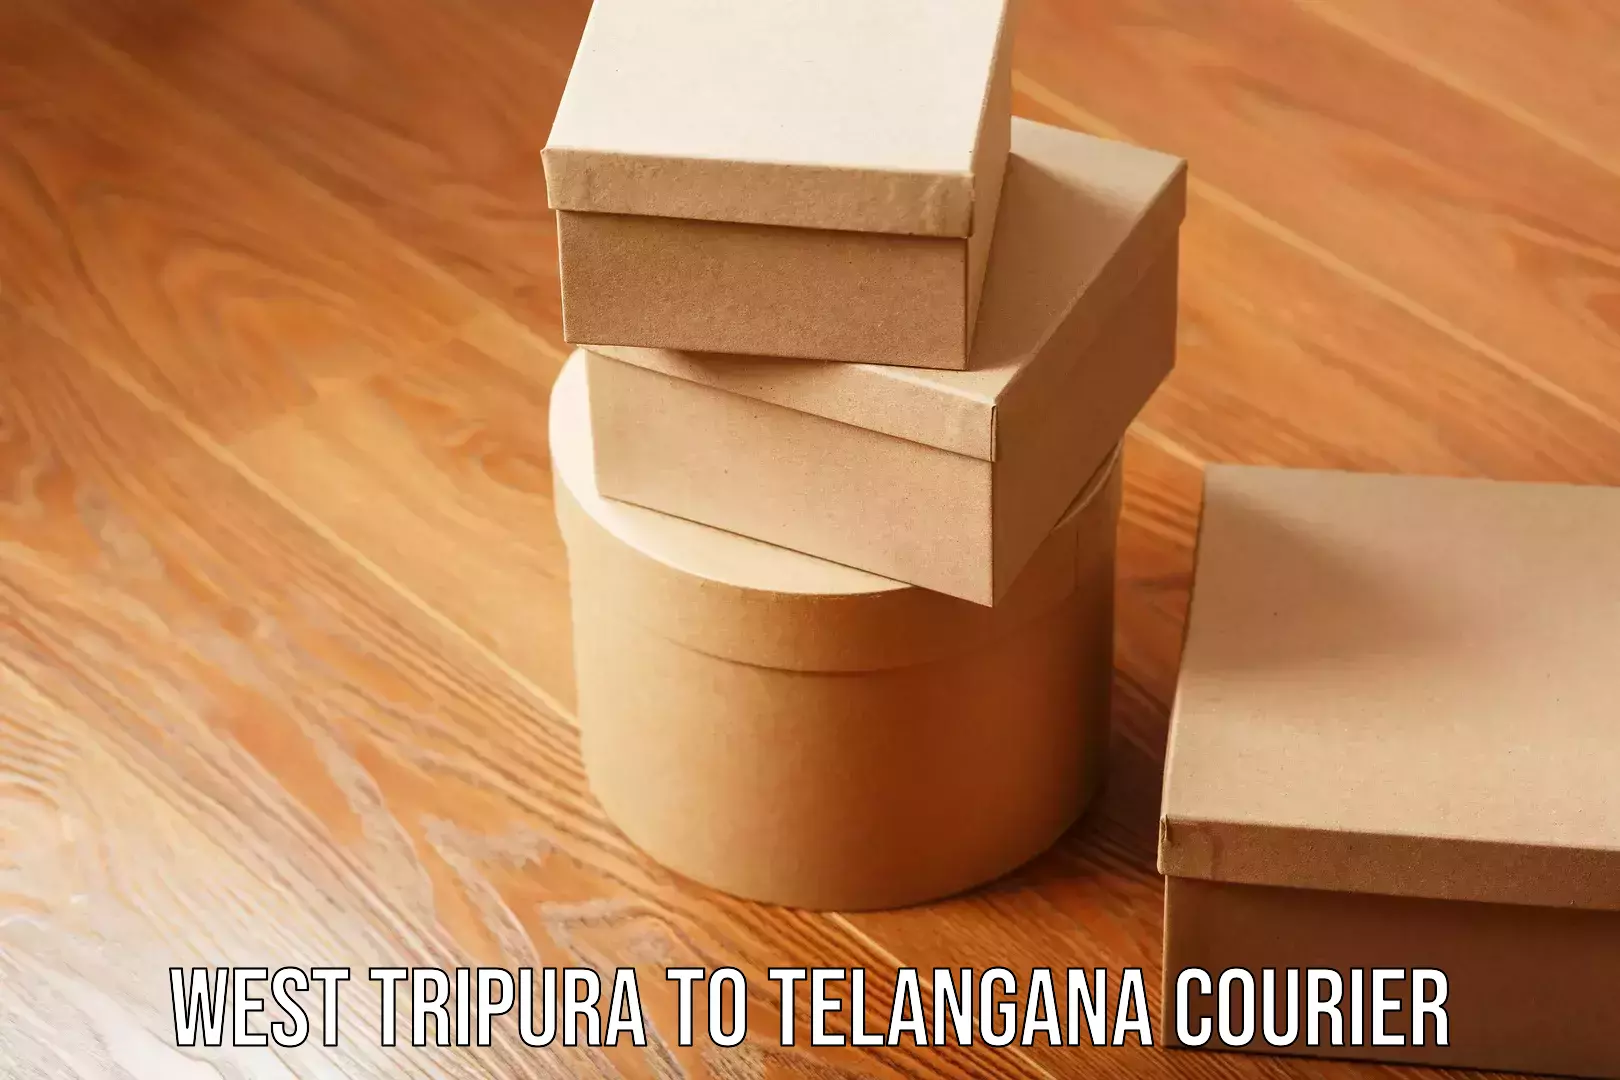 Courier service innovation West Tripura to Telangana